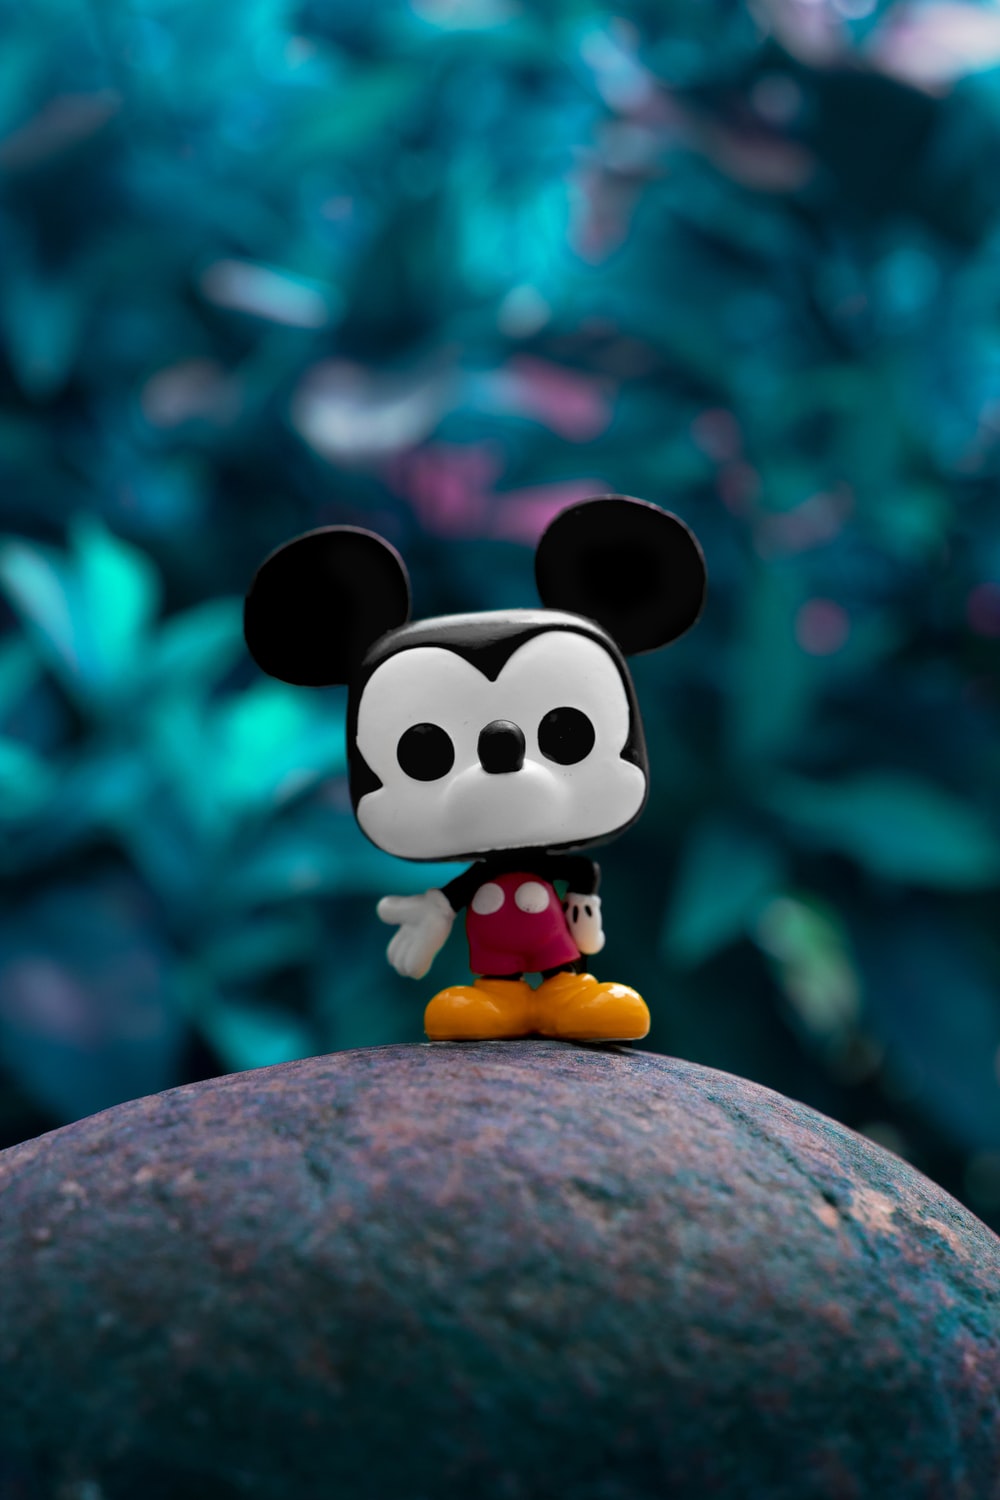 Mickey Mouse Picture. Download Free Image